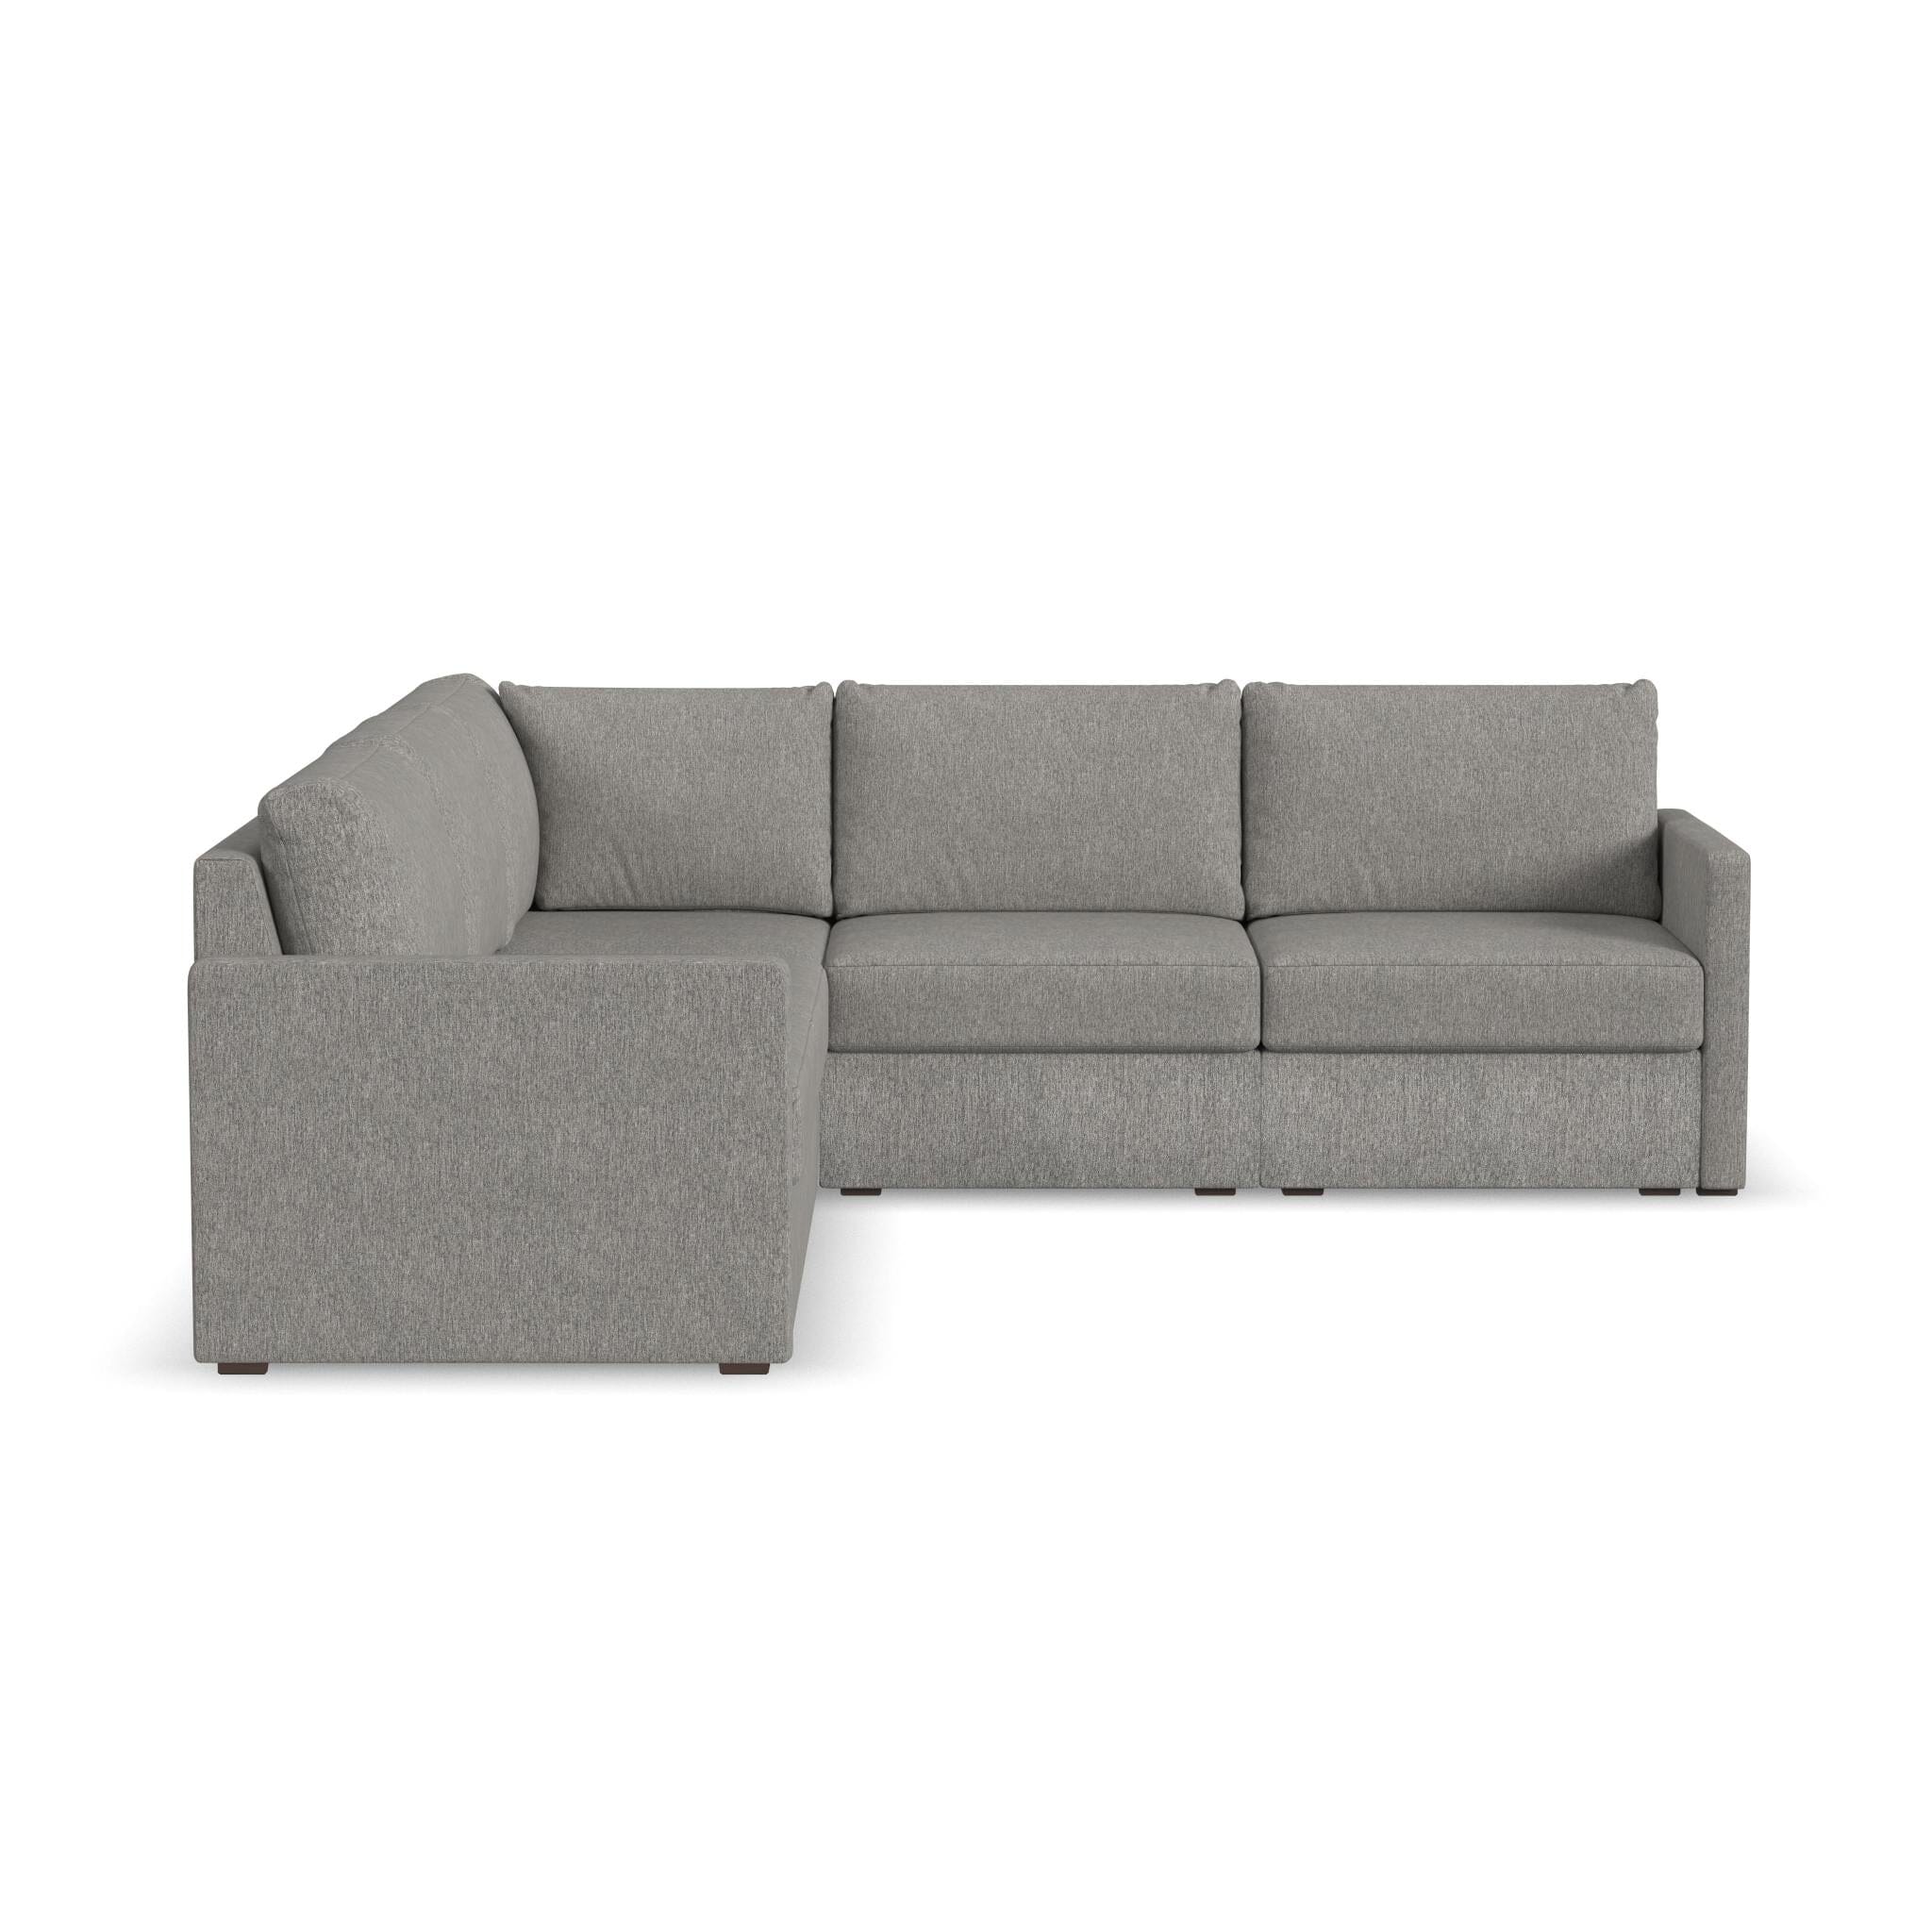 Traditional 5-Seat Sectional with Narrow Arm By Flex Sectional Flex